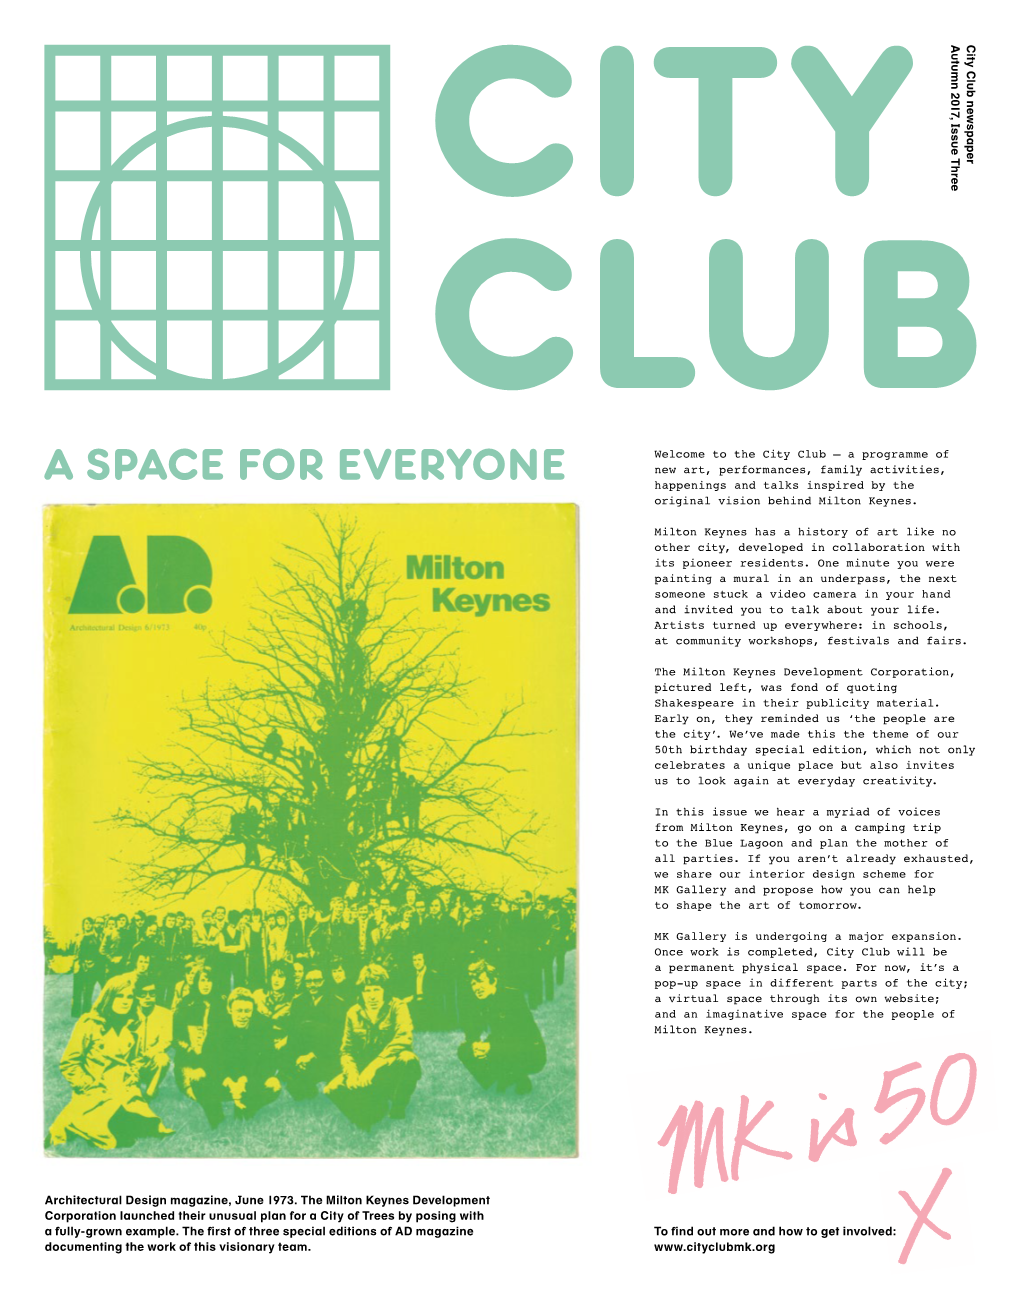 A SPACE for EVERYONE New Art, Performances, Family Activities, Happenings and Talks Inspired by the Original Vision Behind Milton Keynes